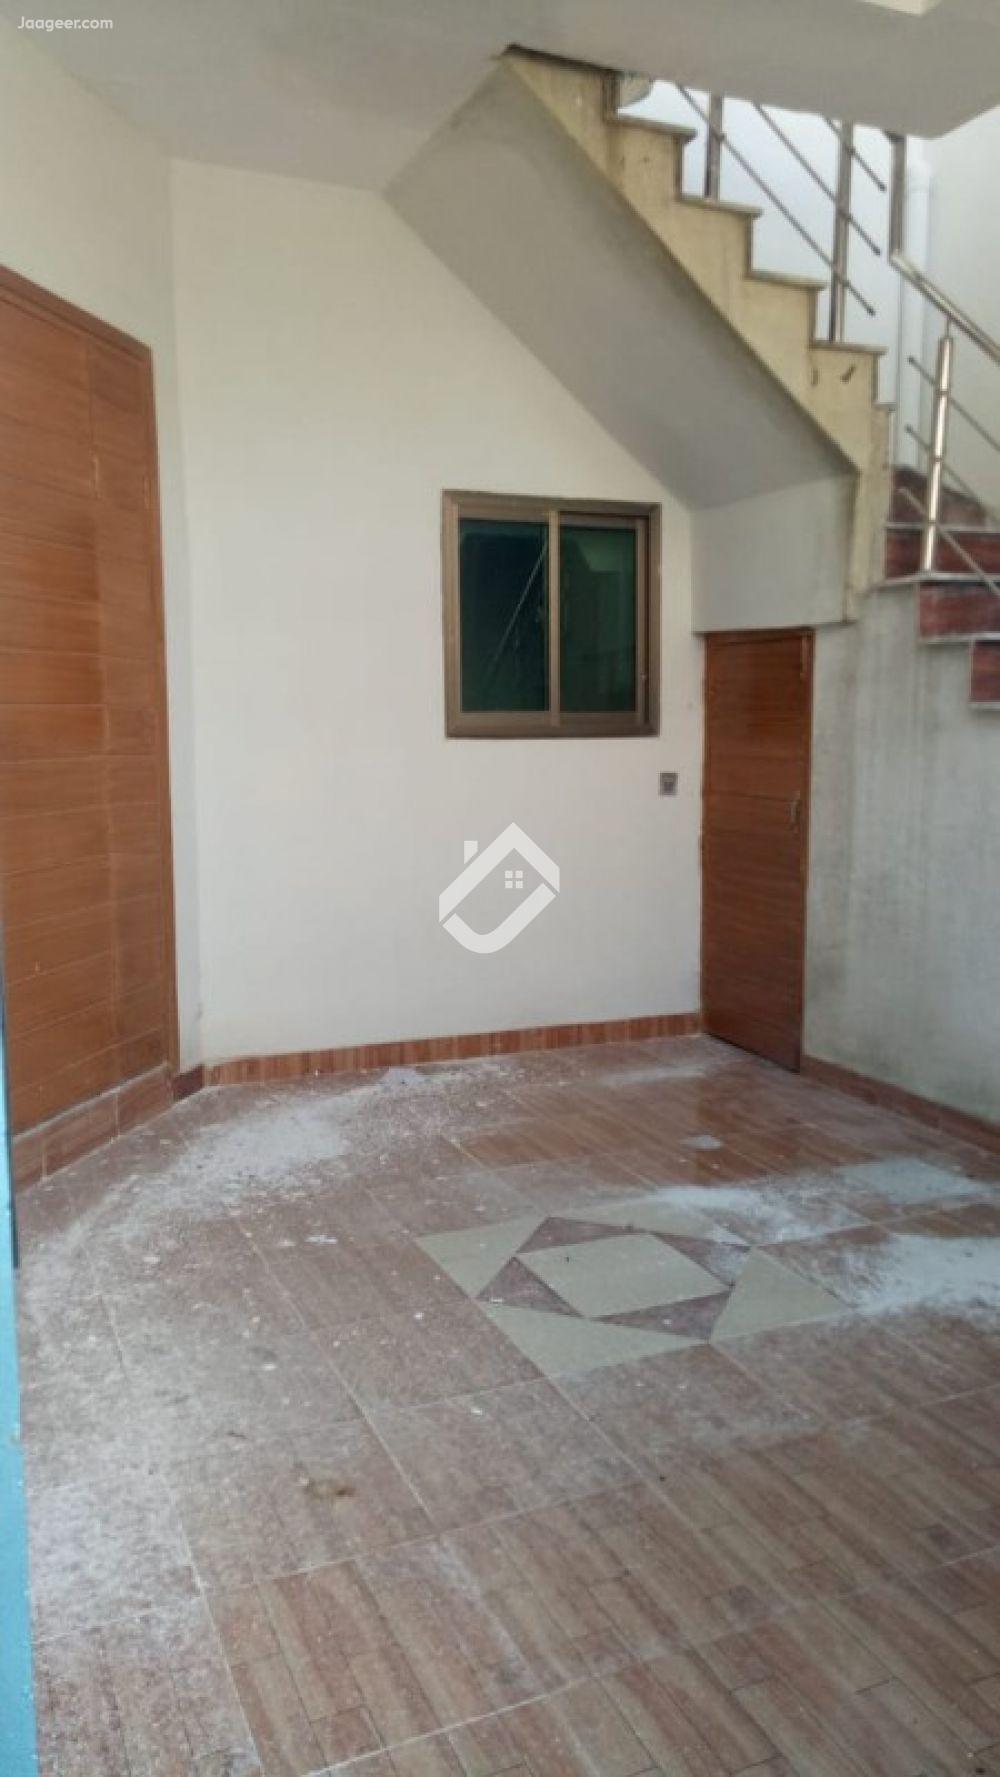 View  3 Marla Double Storey House For Rent In Asad Park Phase 2 in Asad Park Phase 2, Sargodha